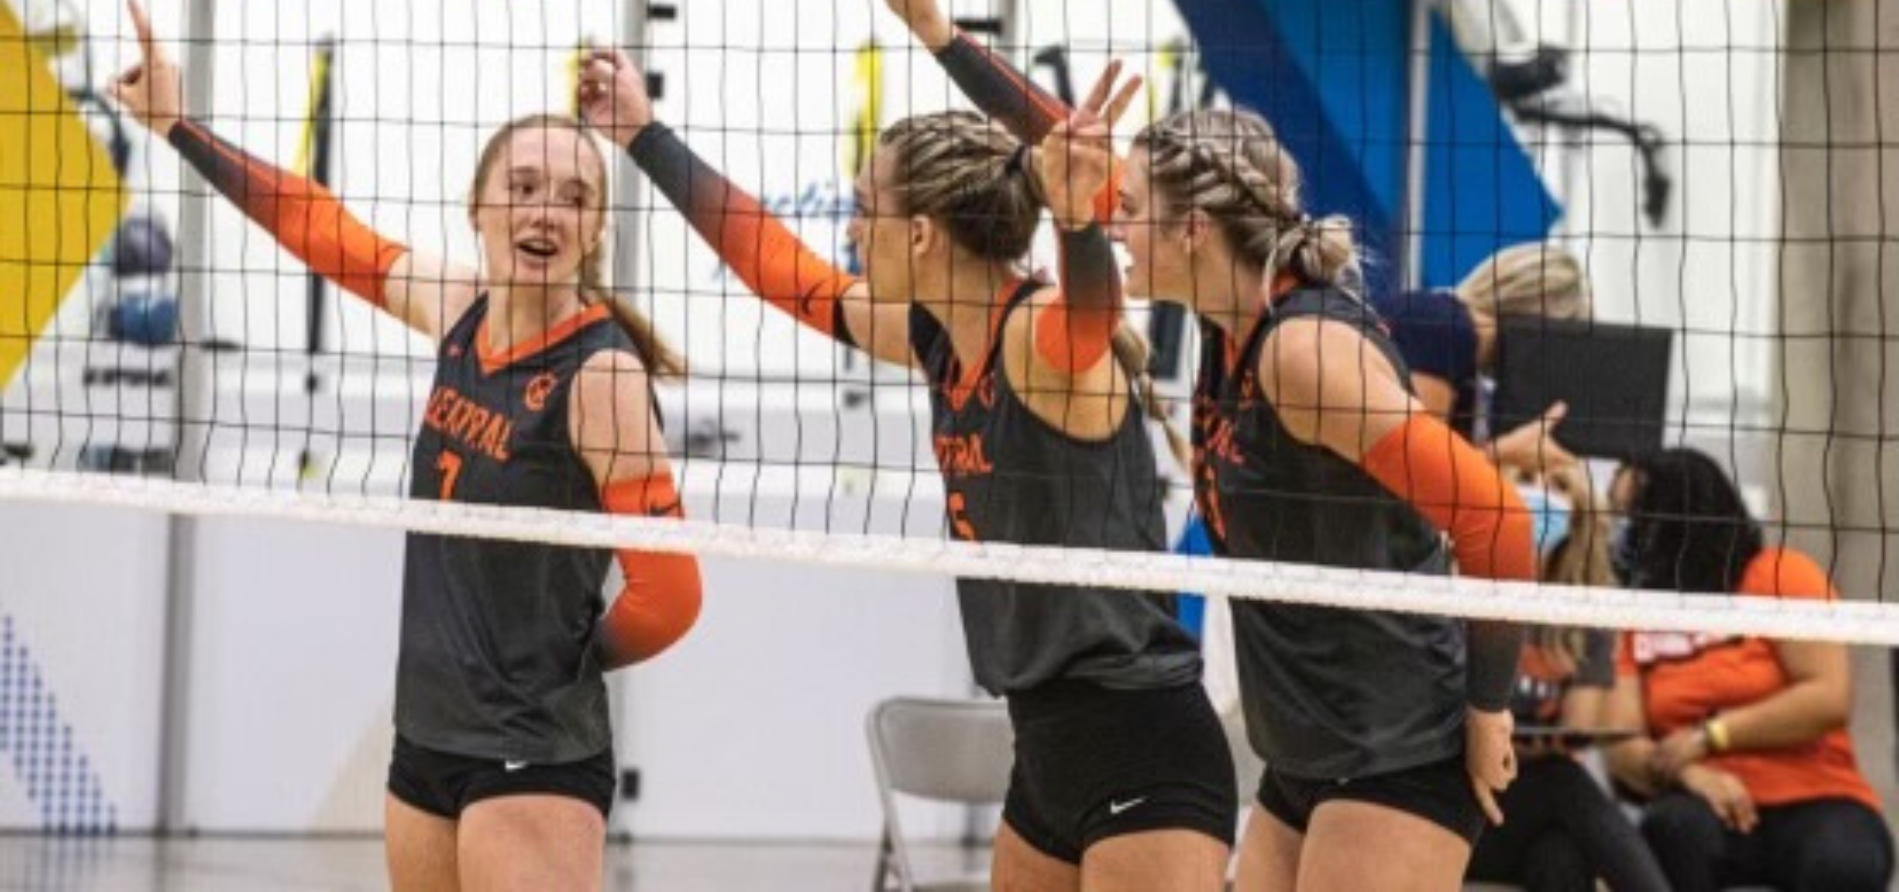 CWC Volleyball posts their best weekend yet